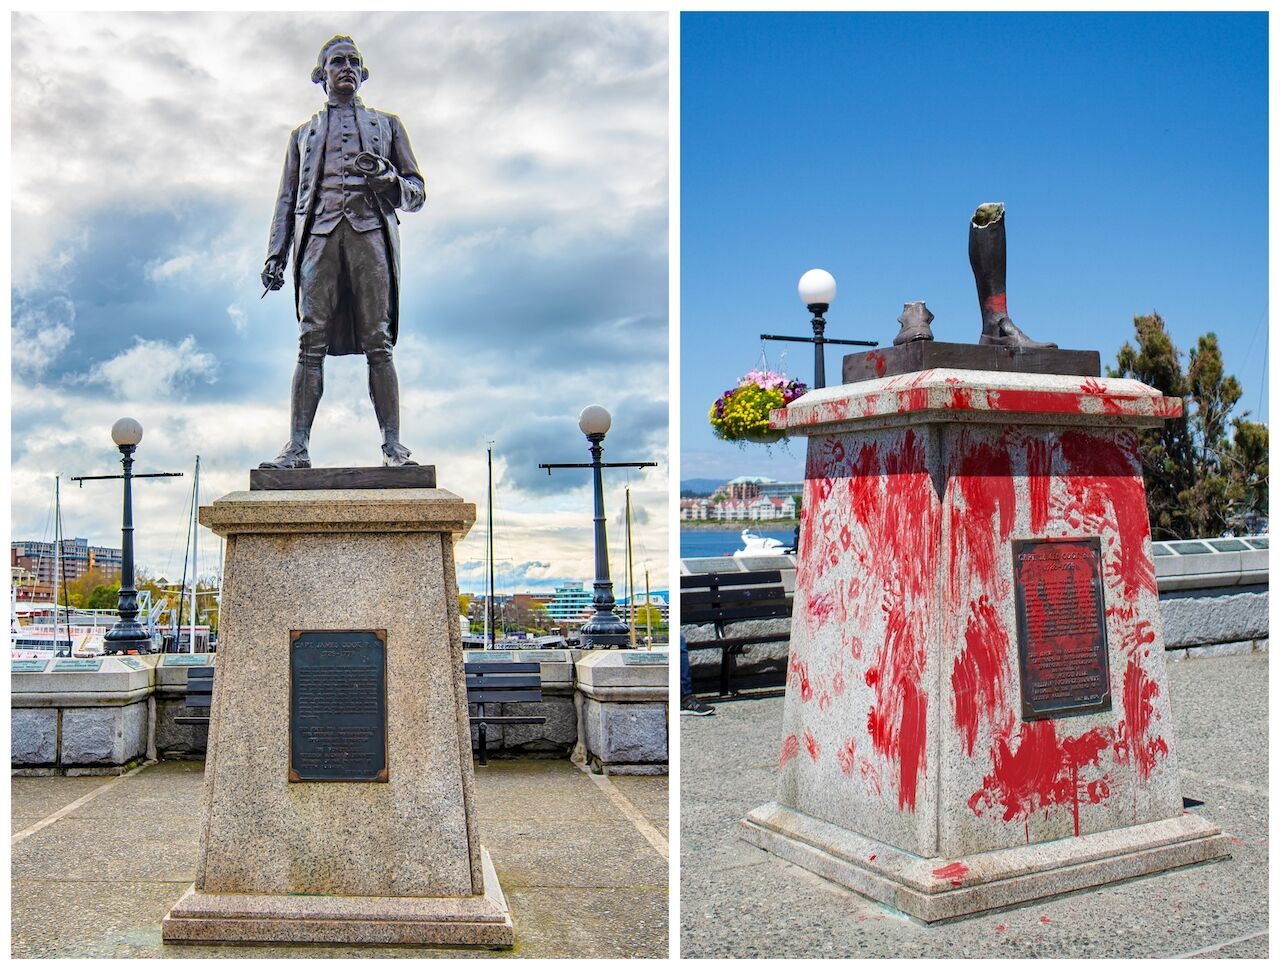 Defaced statue of James Cook in Victoria, BC, Canada